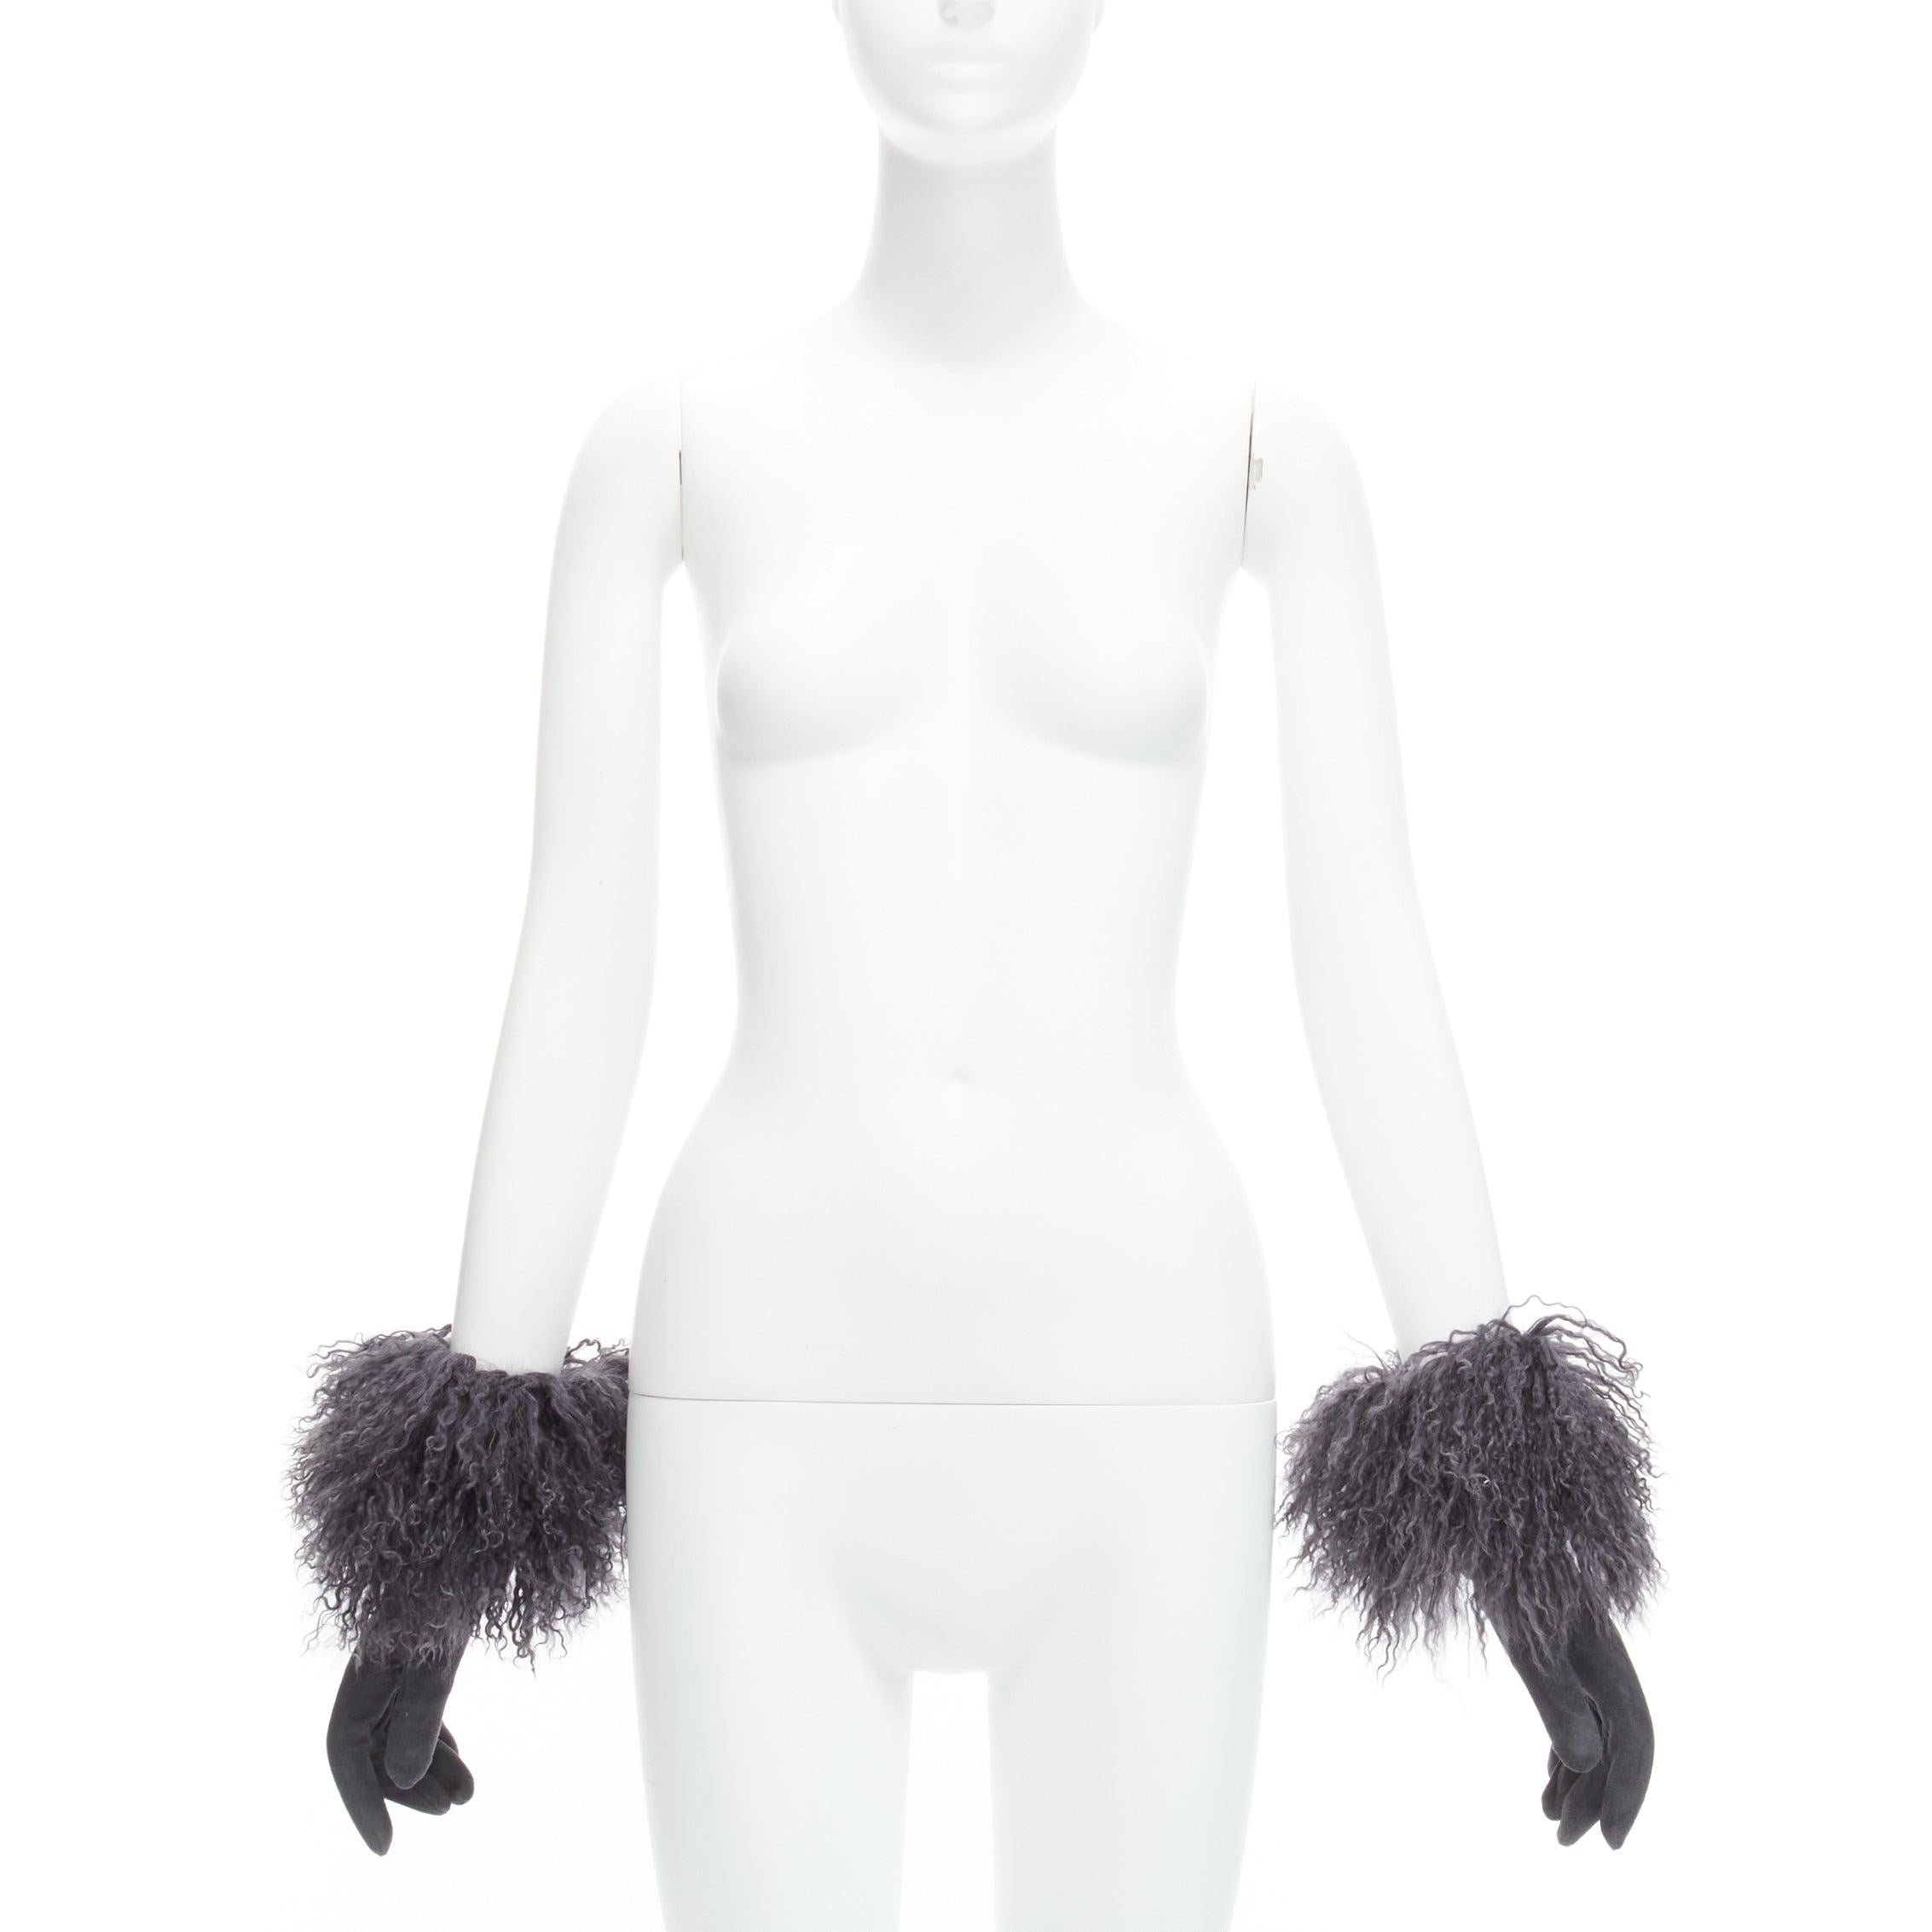 CHRISTIAN DIOR Vintage grey Mongolian shearling fur suede lace panel gloves US7.5
Reference: GIYG/A00377
Brand: Christian Dior
Designer: John Galliano
Material: Leather, Lace
Color: Grey, Black
Pattern: Lace
Closure: Snap Buttons
Lining: Black